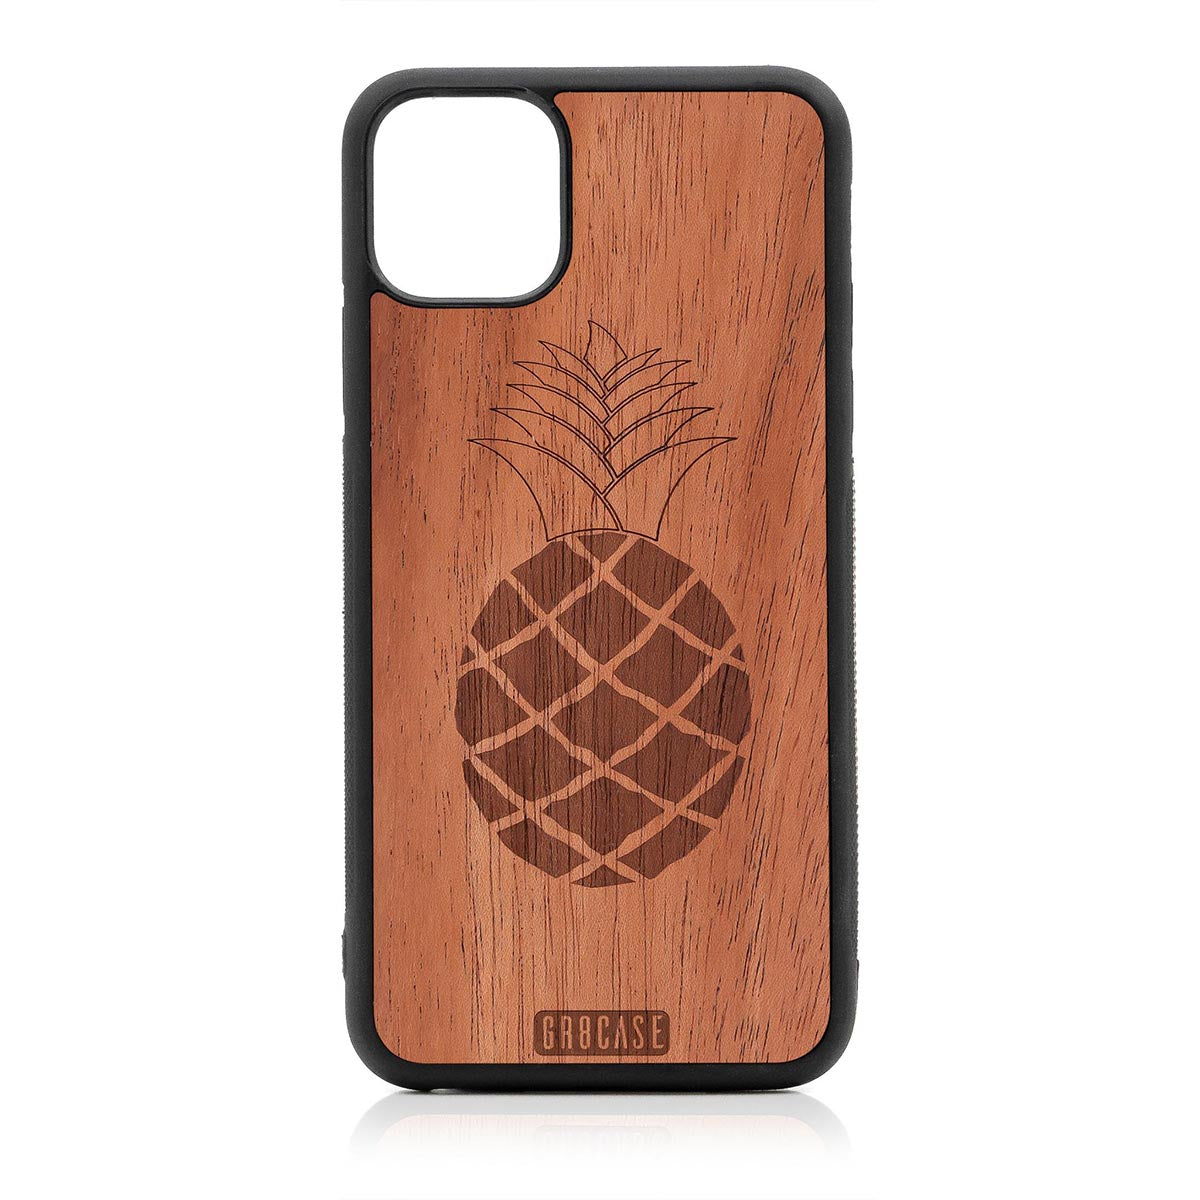 Pineapple Design Wood Case For iPhone 11 Pro Max by GR8CASE